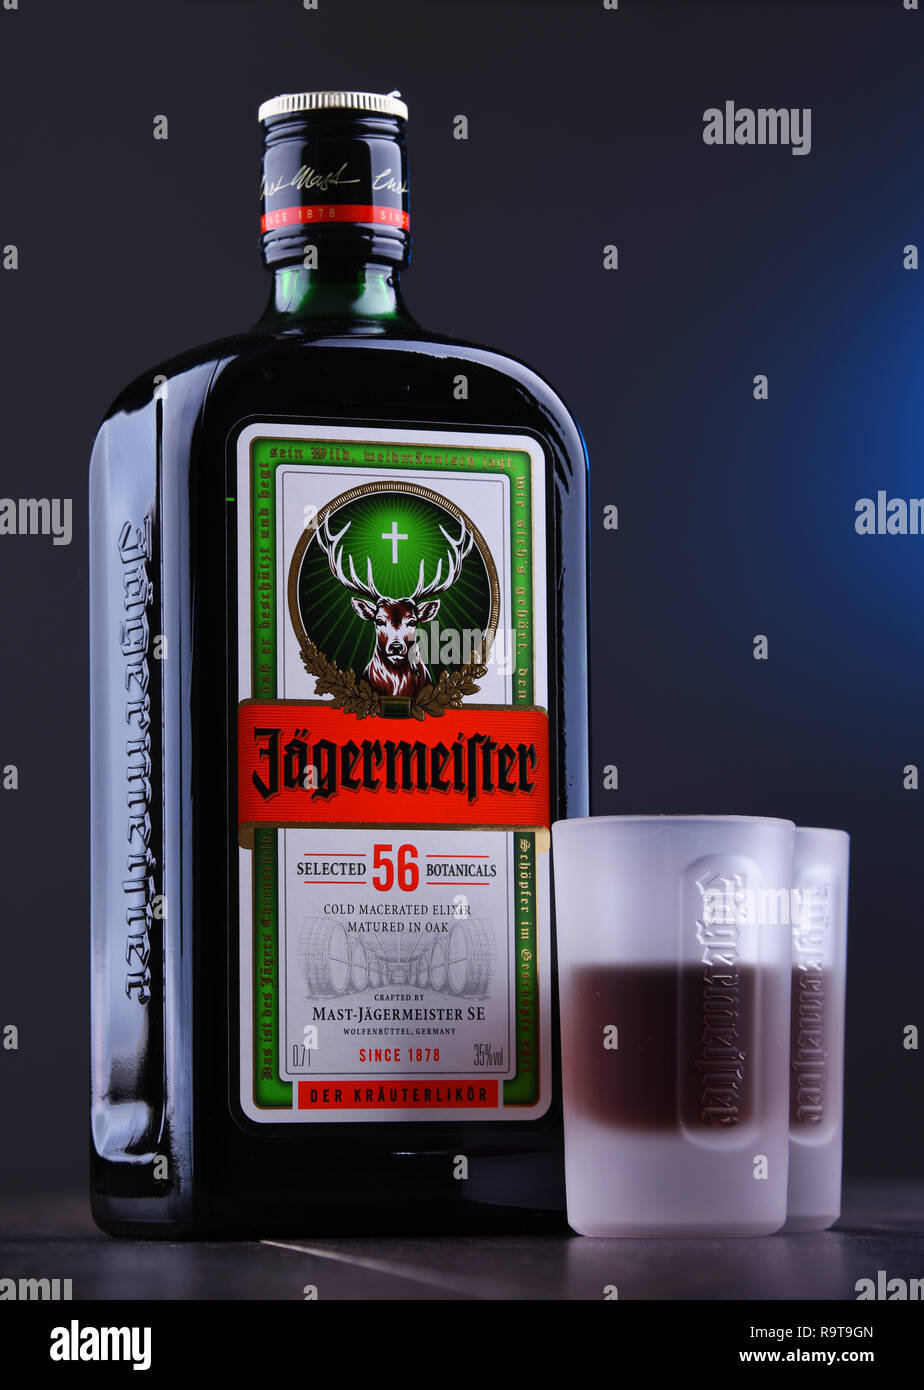 POZNAN, POLAND - NOV 29, 2018: Bottle of Jagermeister, German digestif made  with 56 herbs and spices, the flagship product of Mast-Jagermeister SE  Stock Photo - Alamy